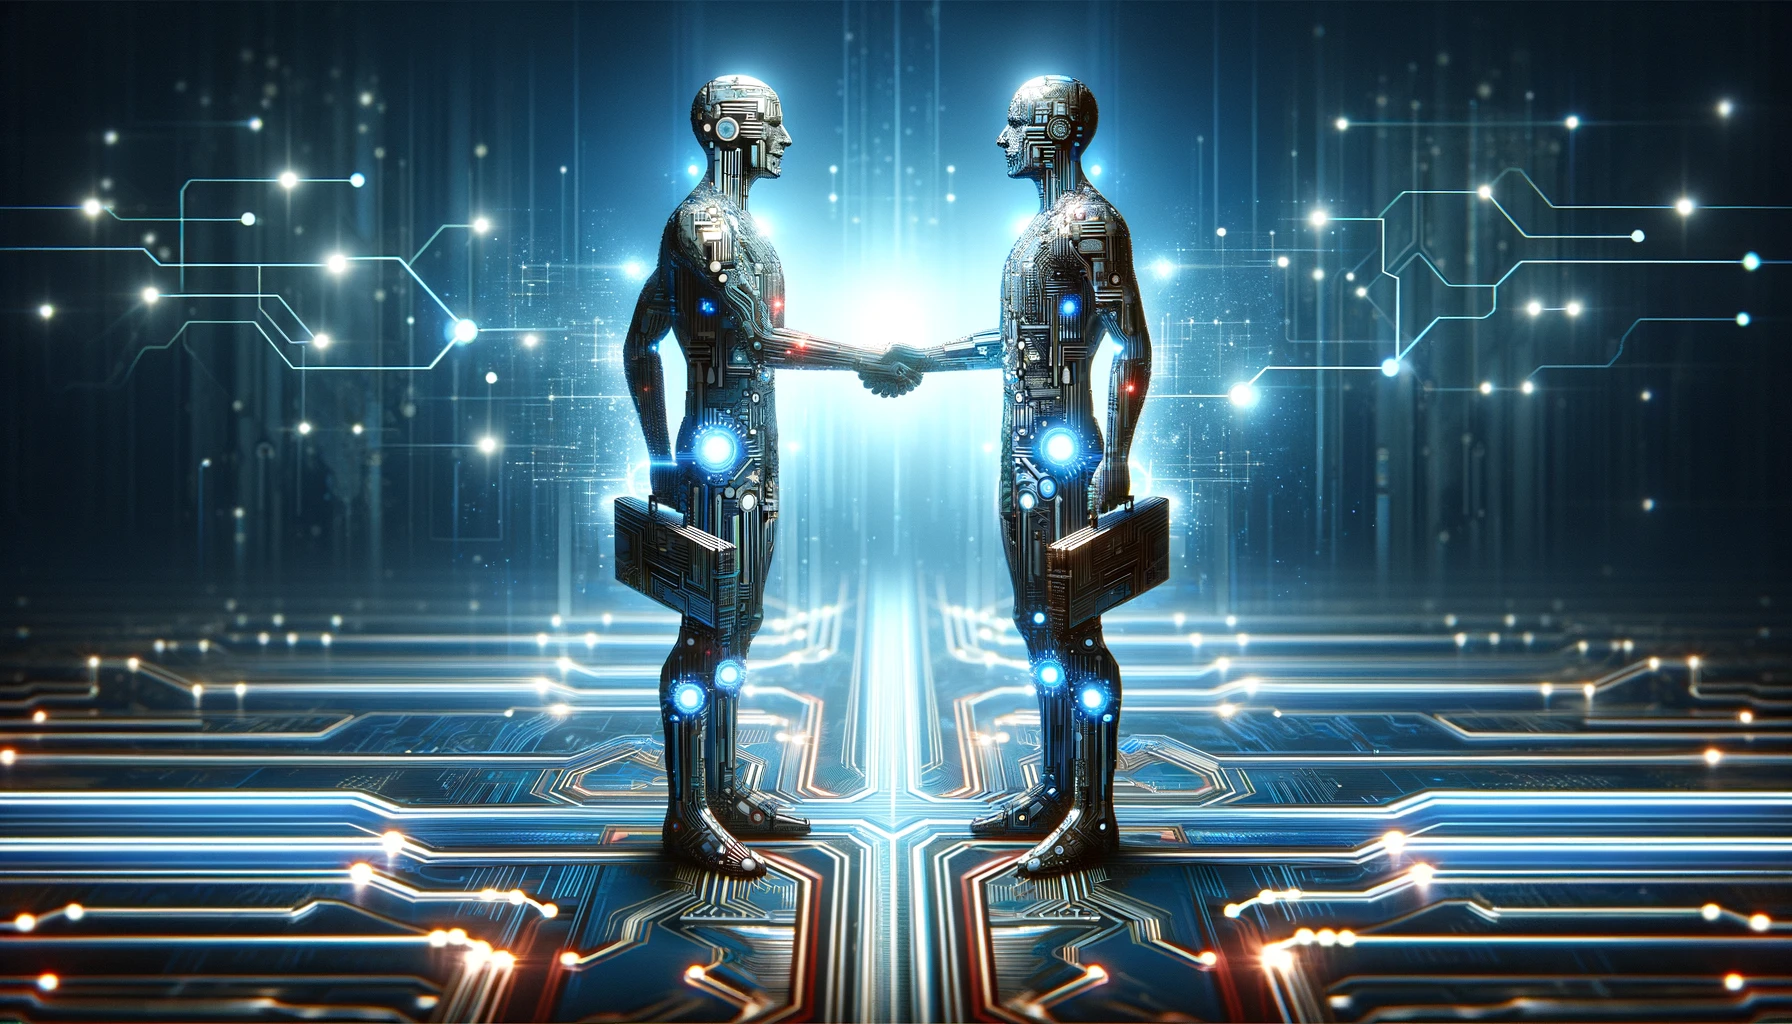 Two abstract humanoid figures composed of digital elements, shaking hands over a futuristic background.